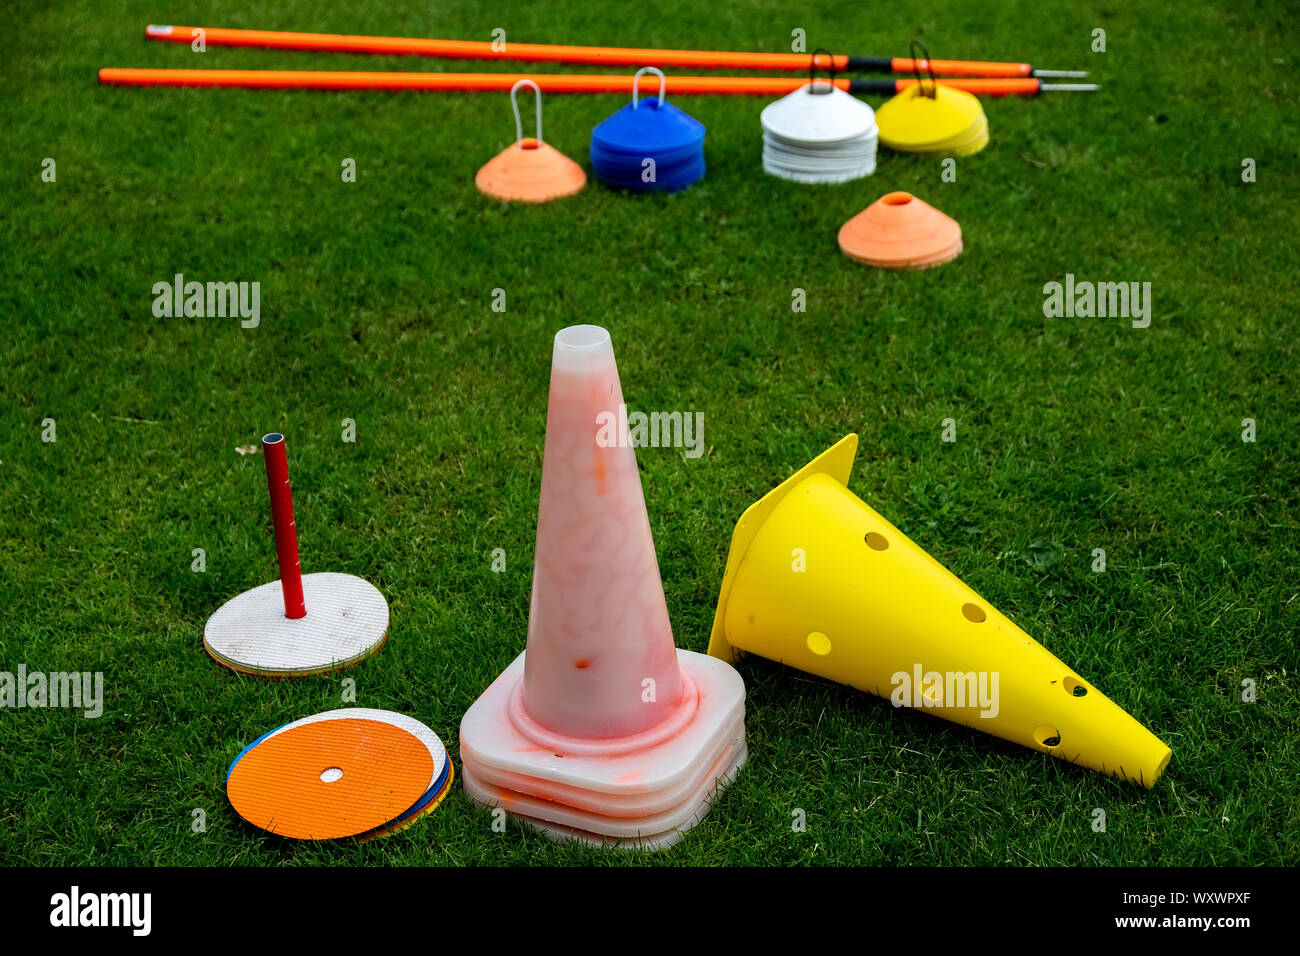 Football Training Equipment High Resolution Stock Photography And Images Alamy